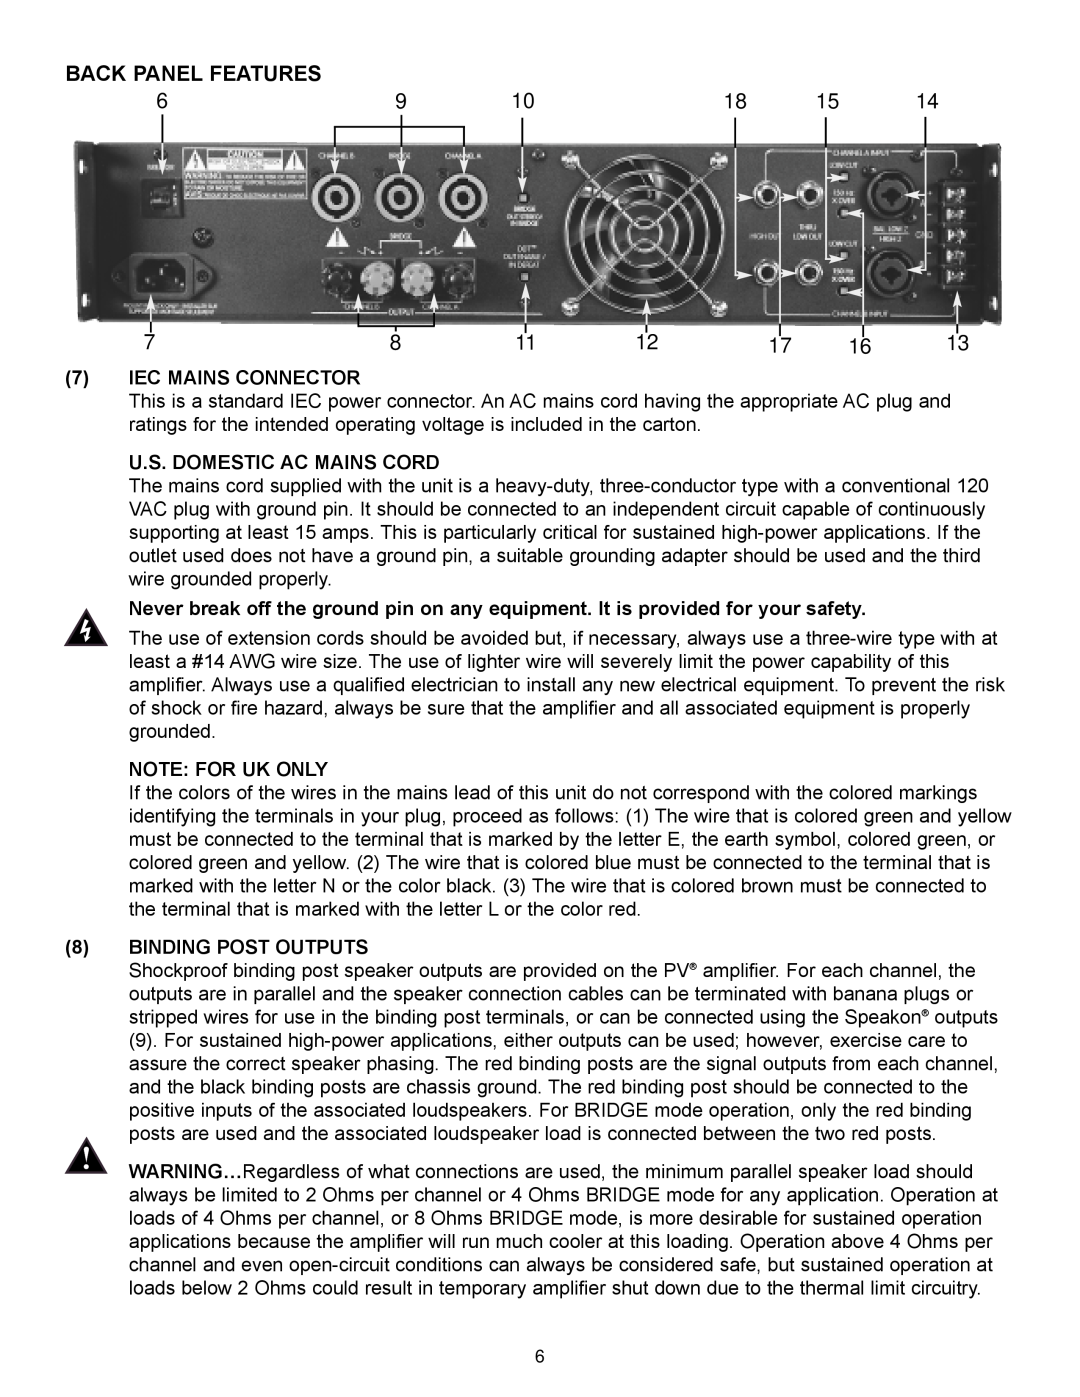 Peavey PV Series manual Back Panel Features, 7IEC MAINS CONNECTOR, U.S. Domestic Ac Mains Cord, Note: For Uk Only 